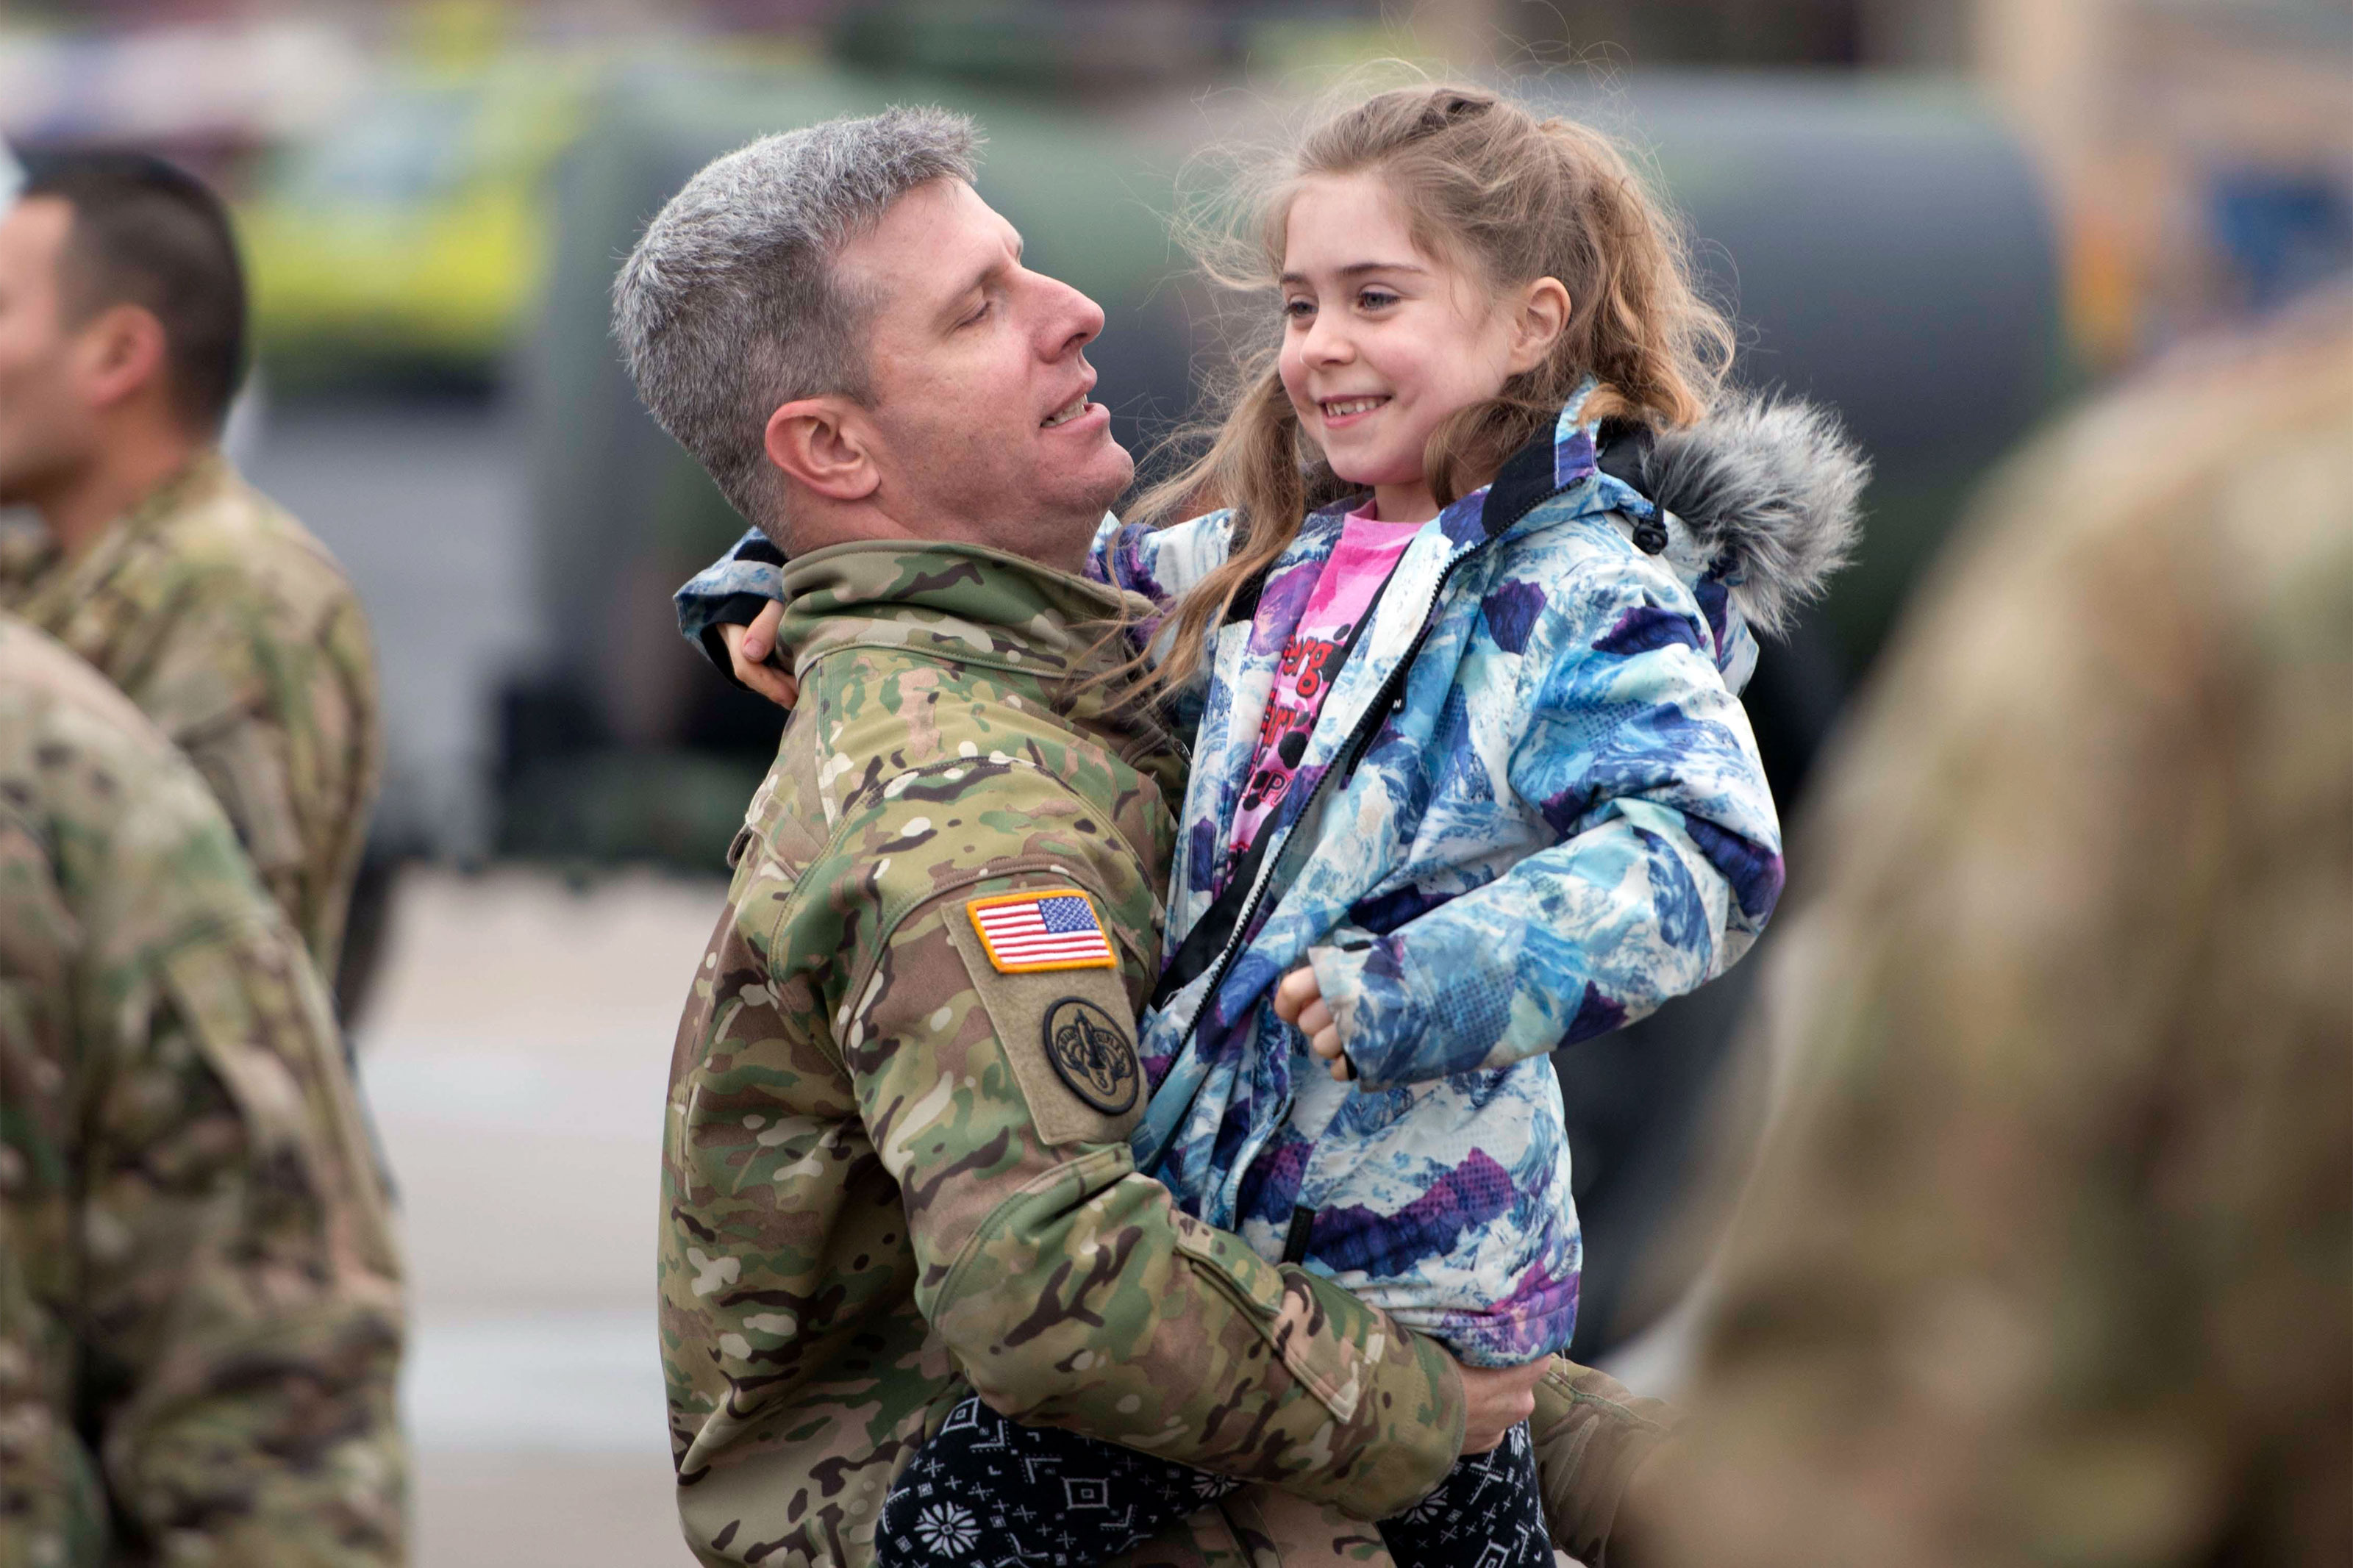 CW3 Erik Herr carries his excited daughter on the annual 1-214th GSAB on their annual &quot;Family Safety Day&quot;. (U.S. Army/Paul Hughes)